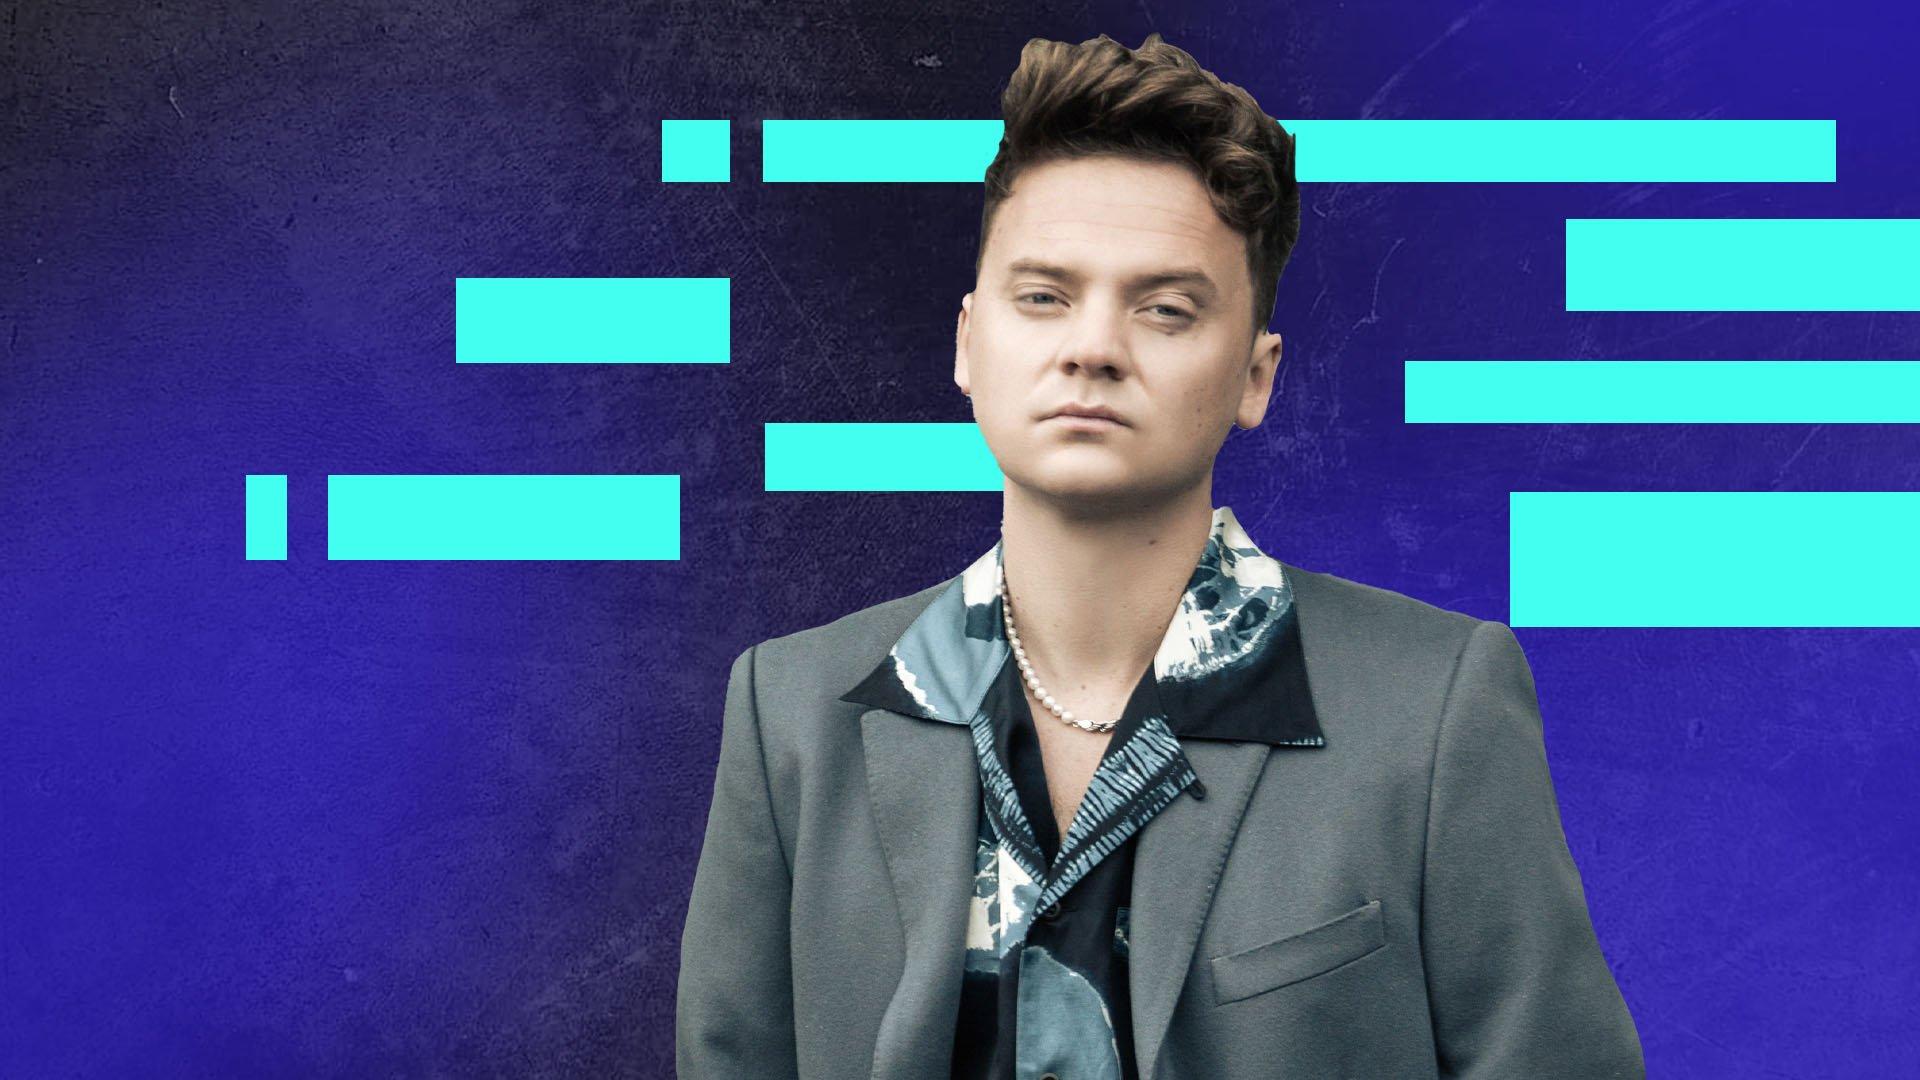 Conor Maynard posing for a photo for GRAMMY.com's Global Spin series